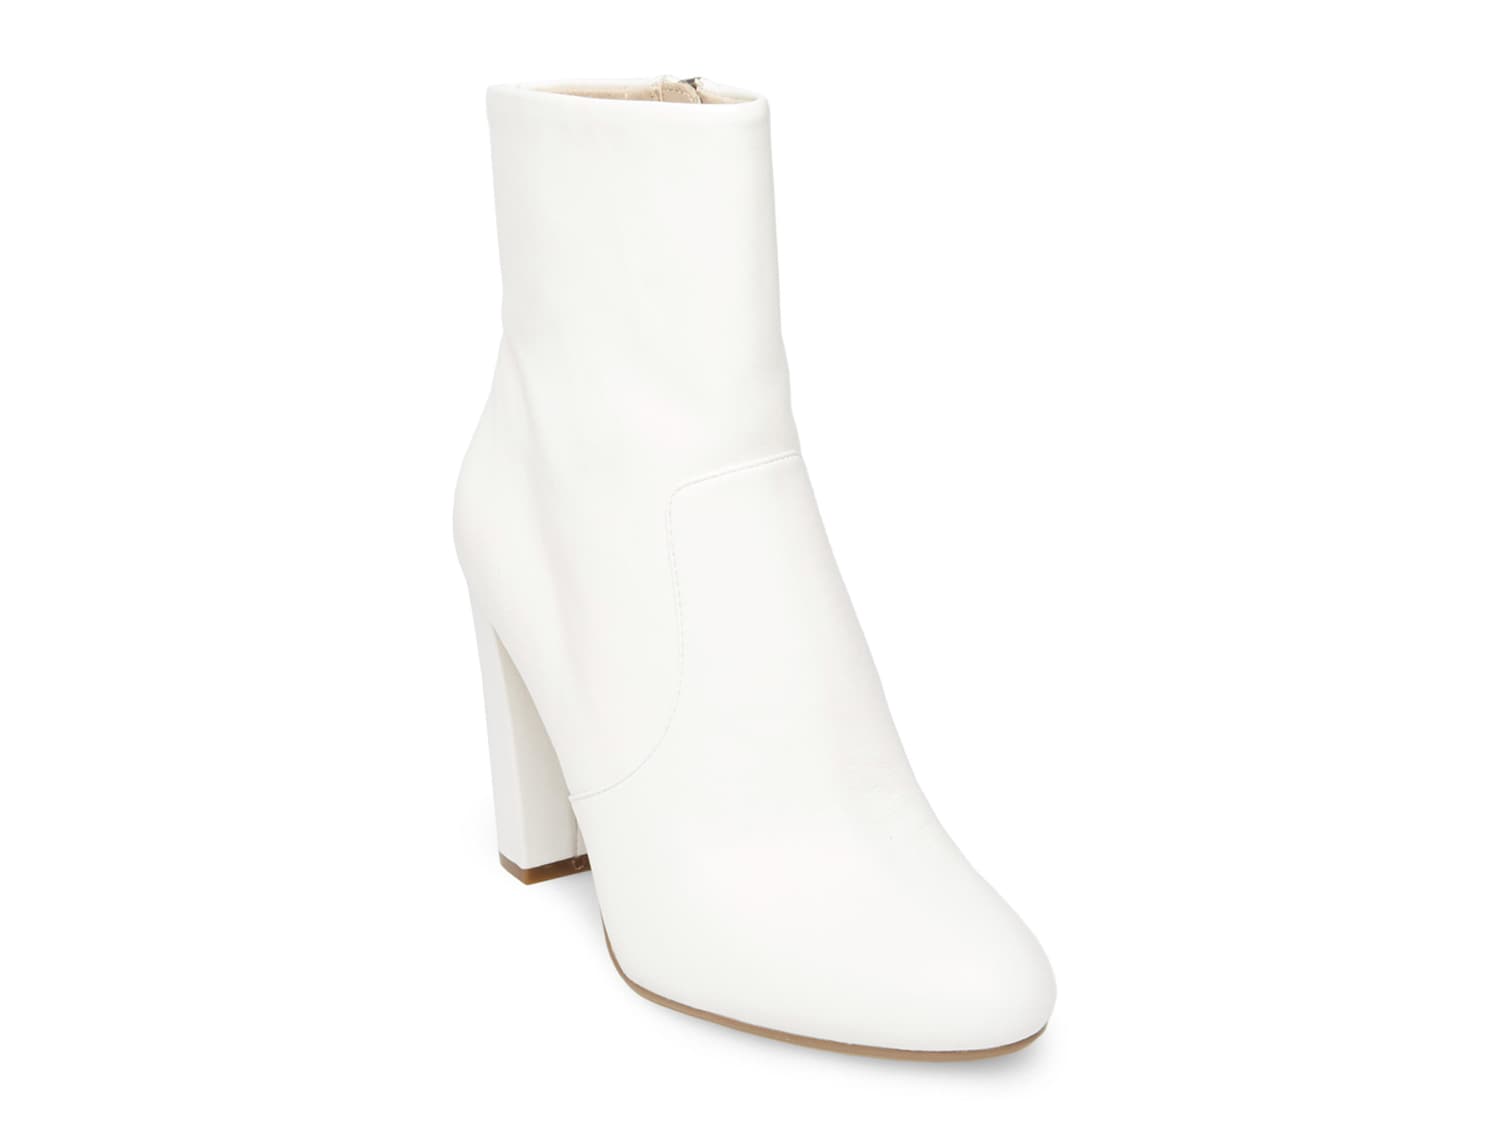 Steve Madden Editor Bootie - Free Shipping DSW